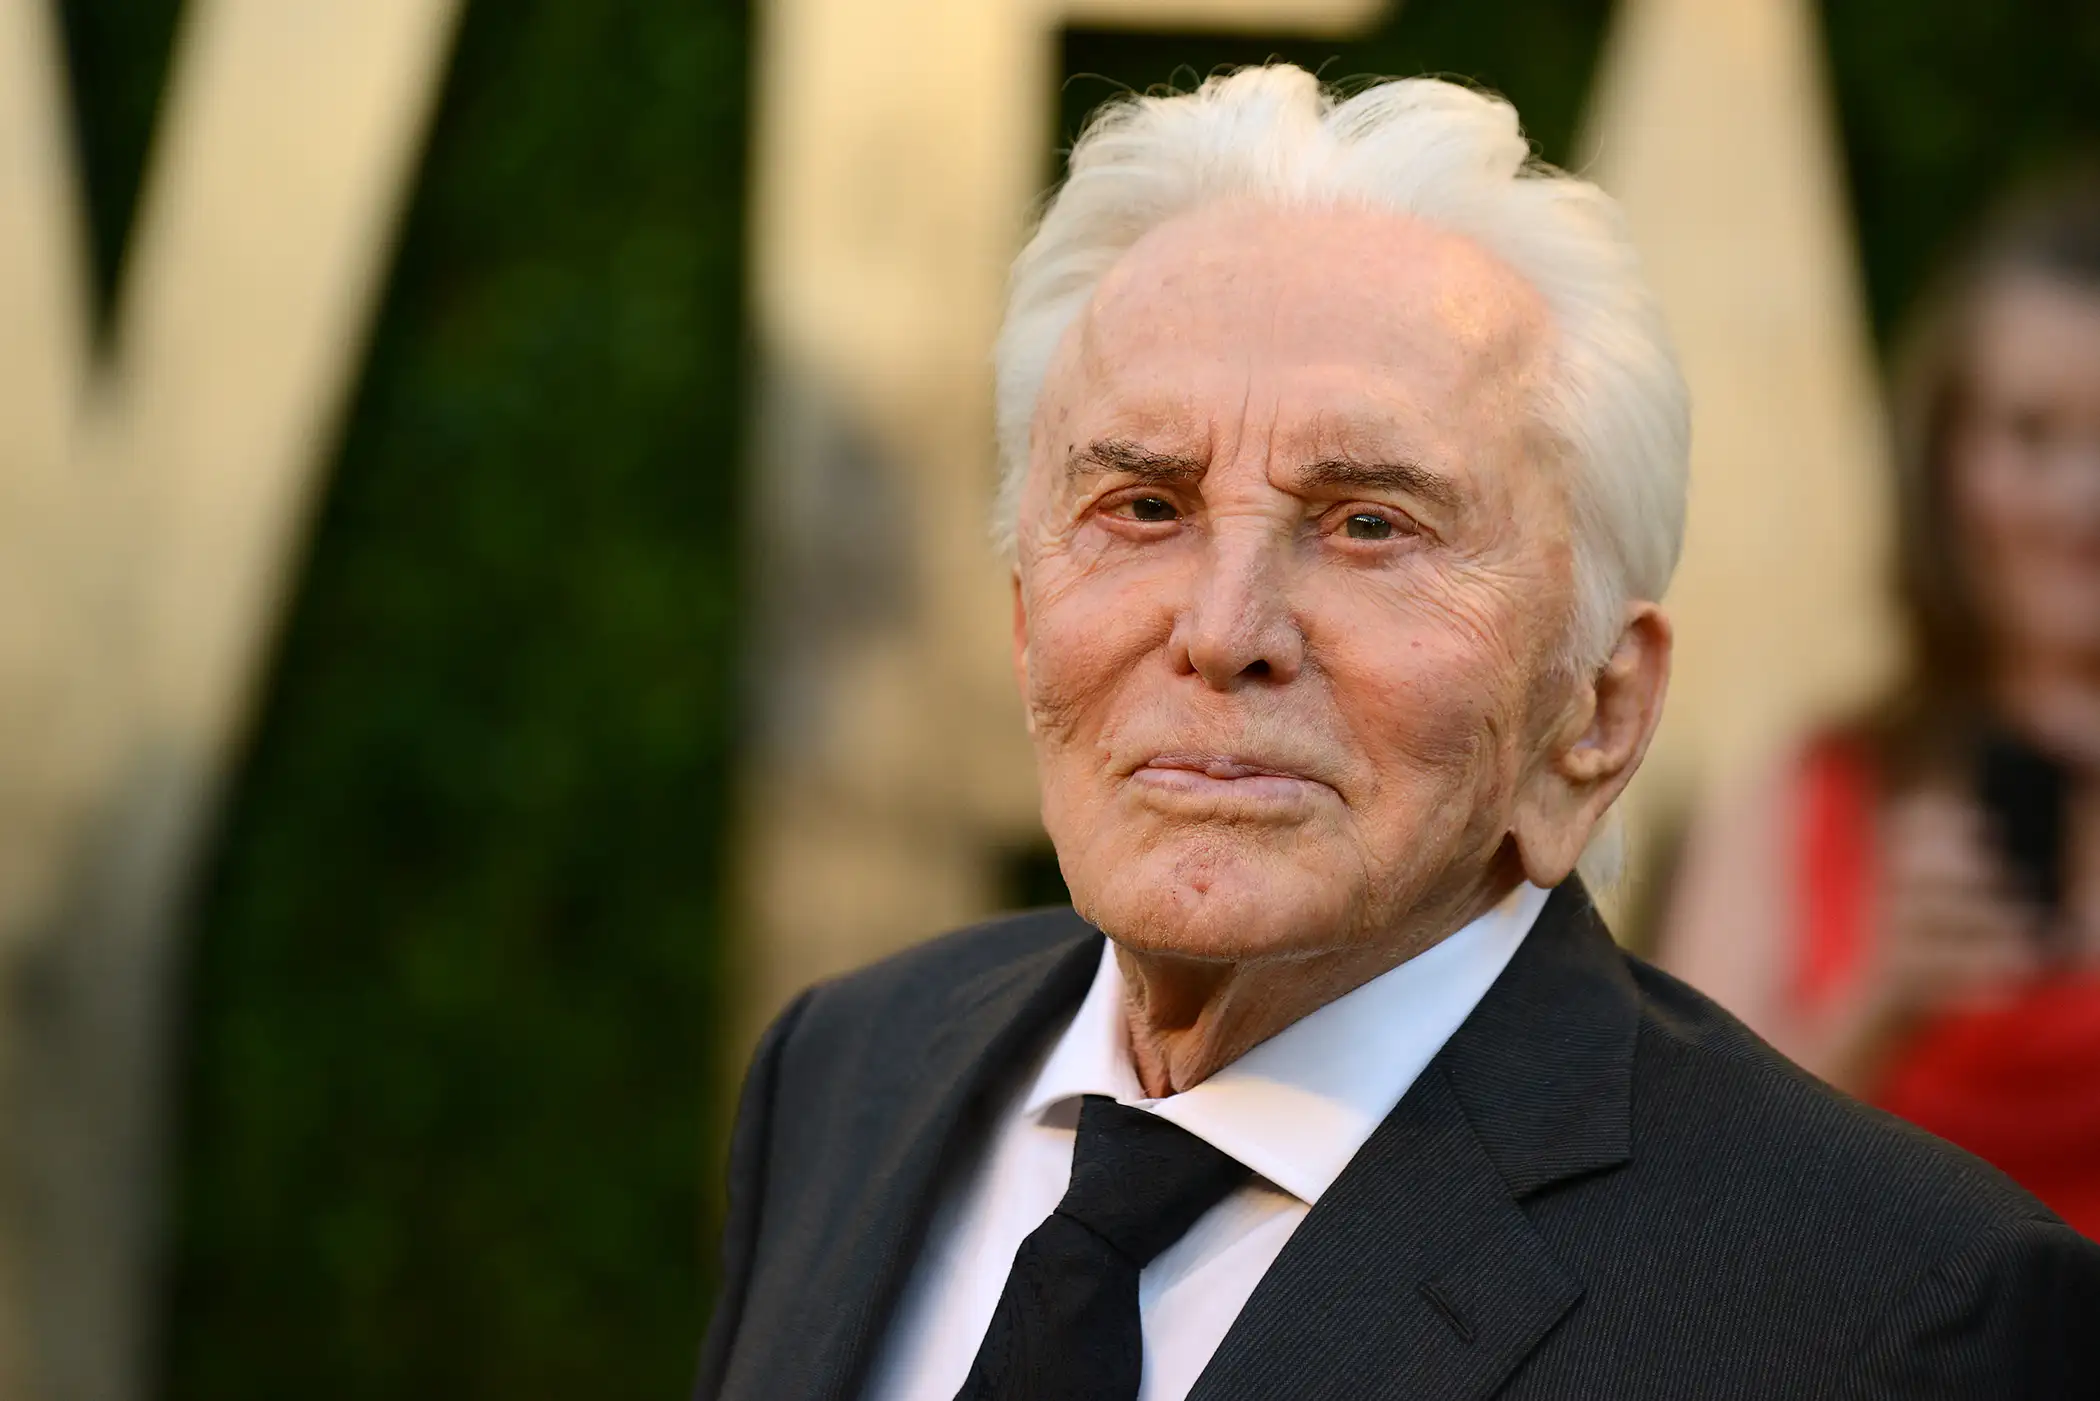 Actor Kirk Douglas arrives at the 2013 Vanity Fair Oscars Viewing and After Party on Sunday, Feb. 24 2013 at the Sunset Plaza Hotel in West Hollywood, California.